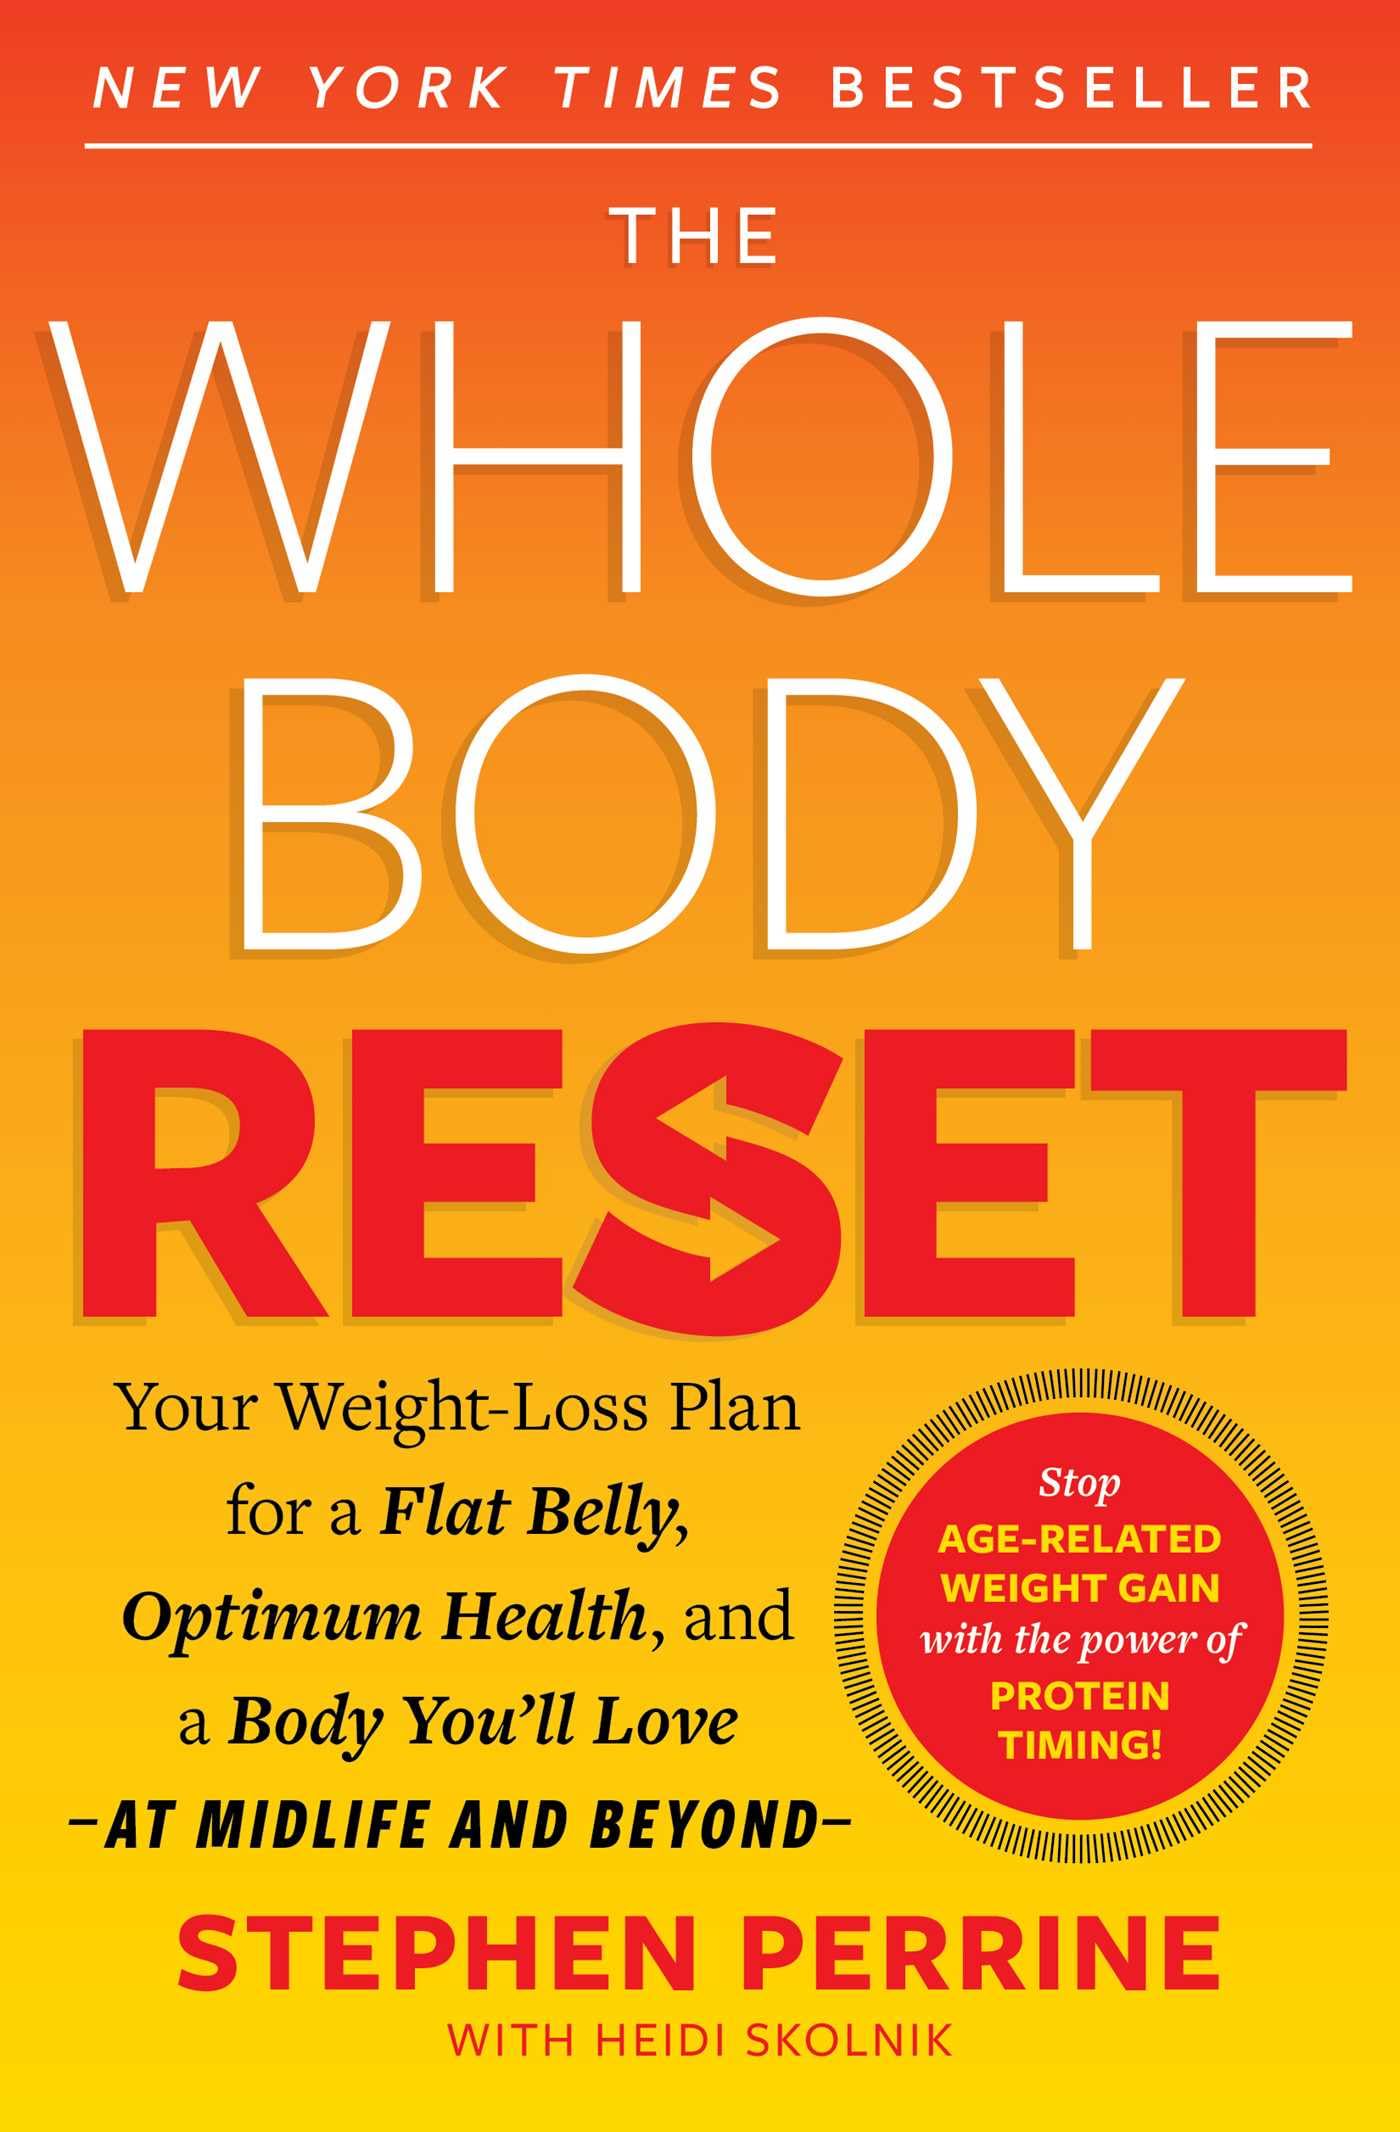 The Whole Body Reset: Your Weight-Loss Plan for a Flat Belly, Optimum Health and a Body You'll Love at Midlife and Beyond by Perrine, Stephen